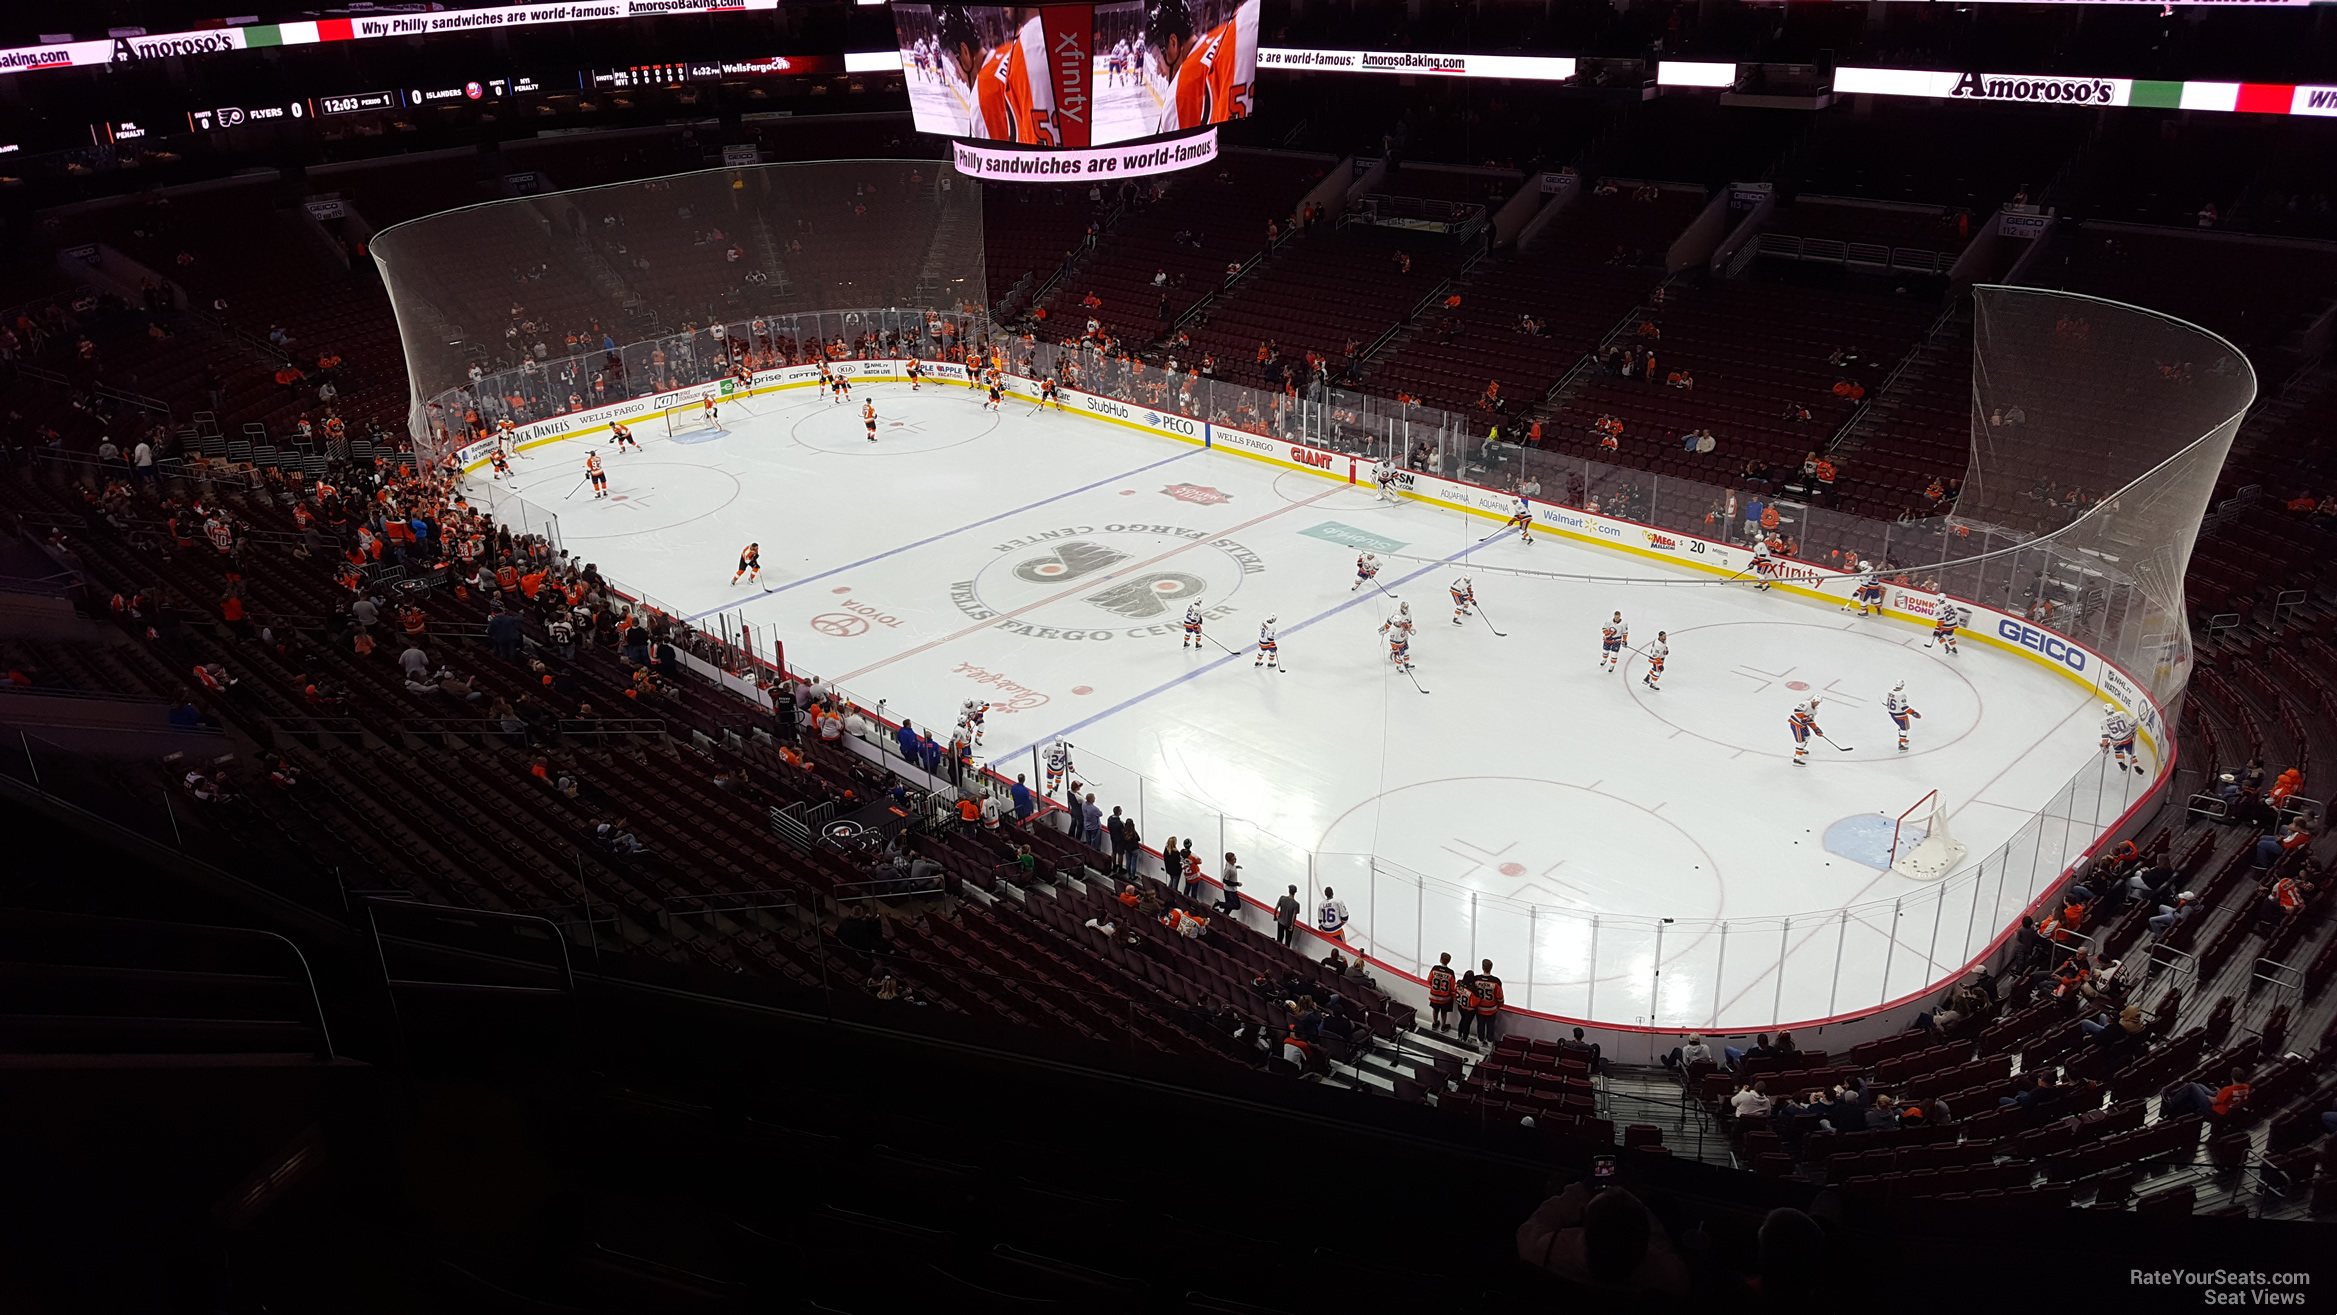 section 204a, row 8 seat view  for hockey - wells fargo center